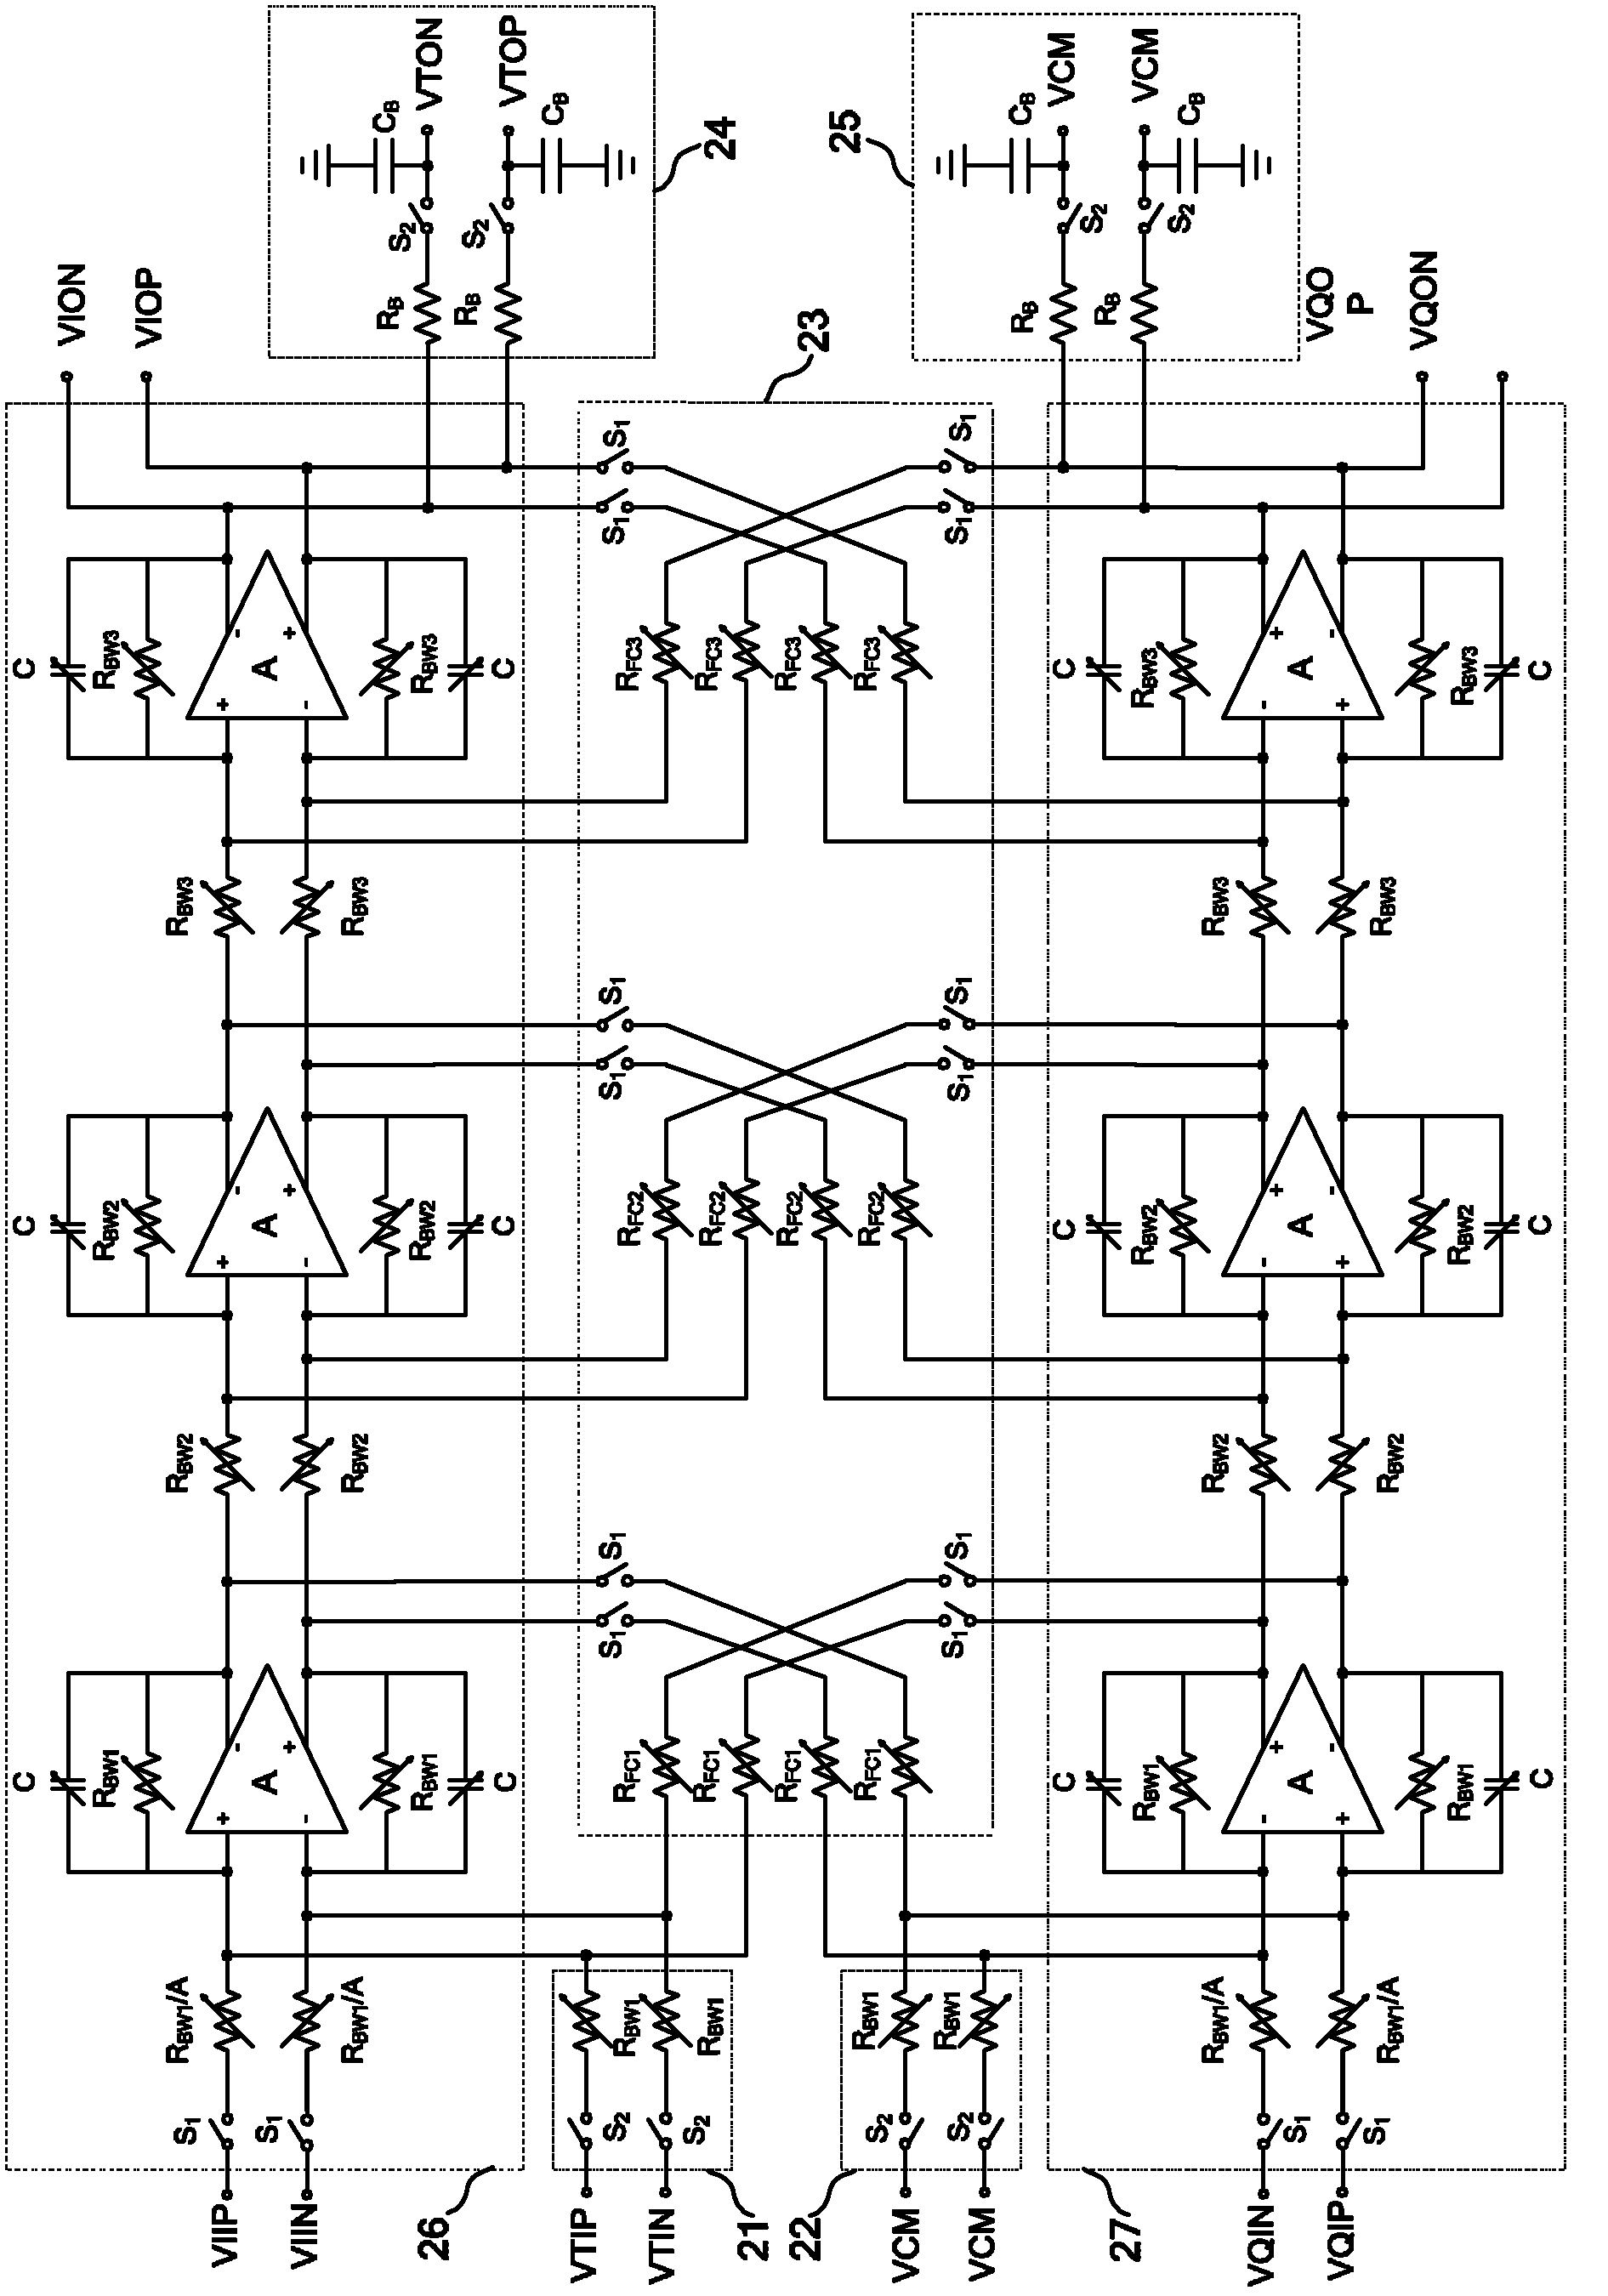 Double-mode type active power filter circuit with adjustable bandwidth